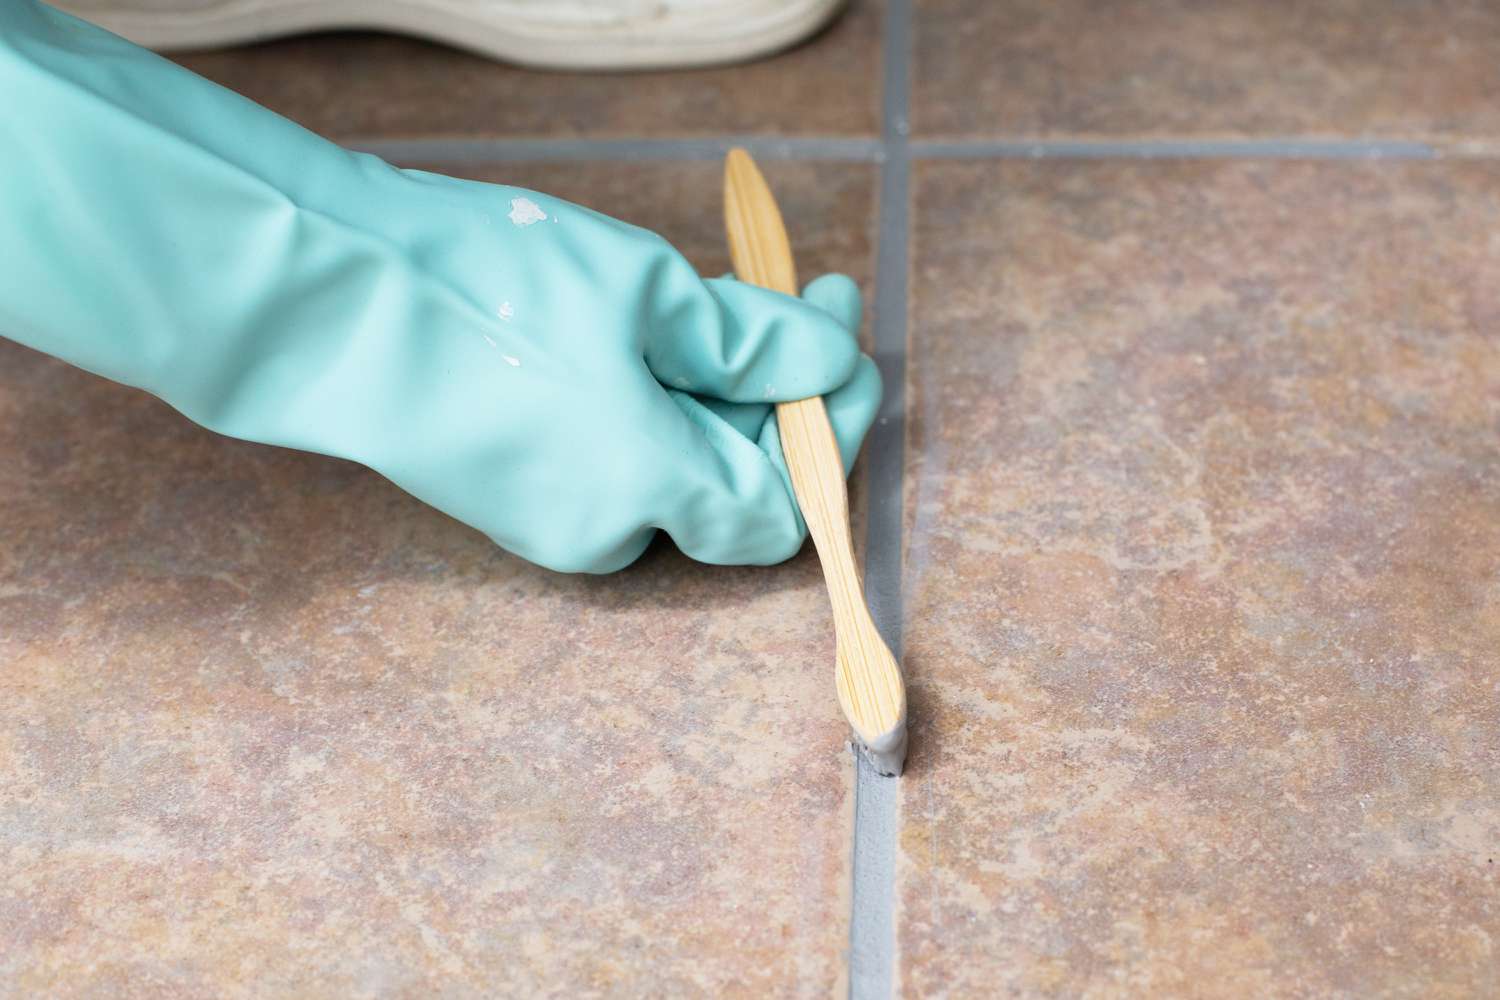 Gray grout colorant on old toothbrush added to grout between brown tiles with green glove